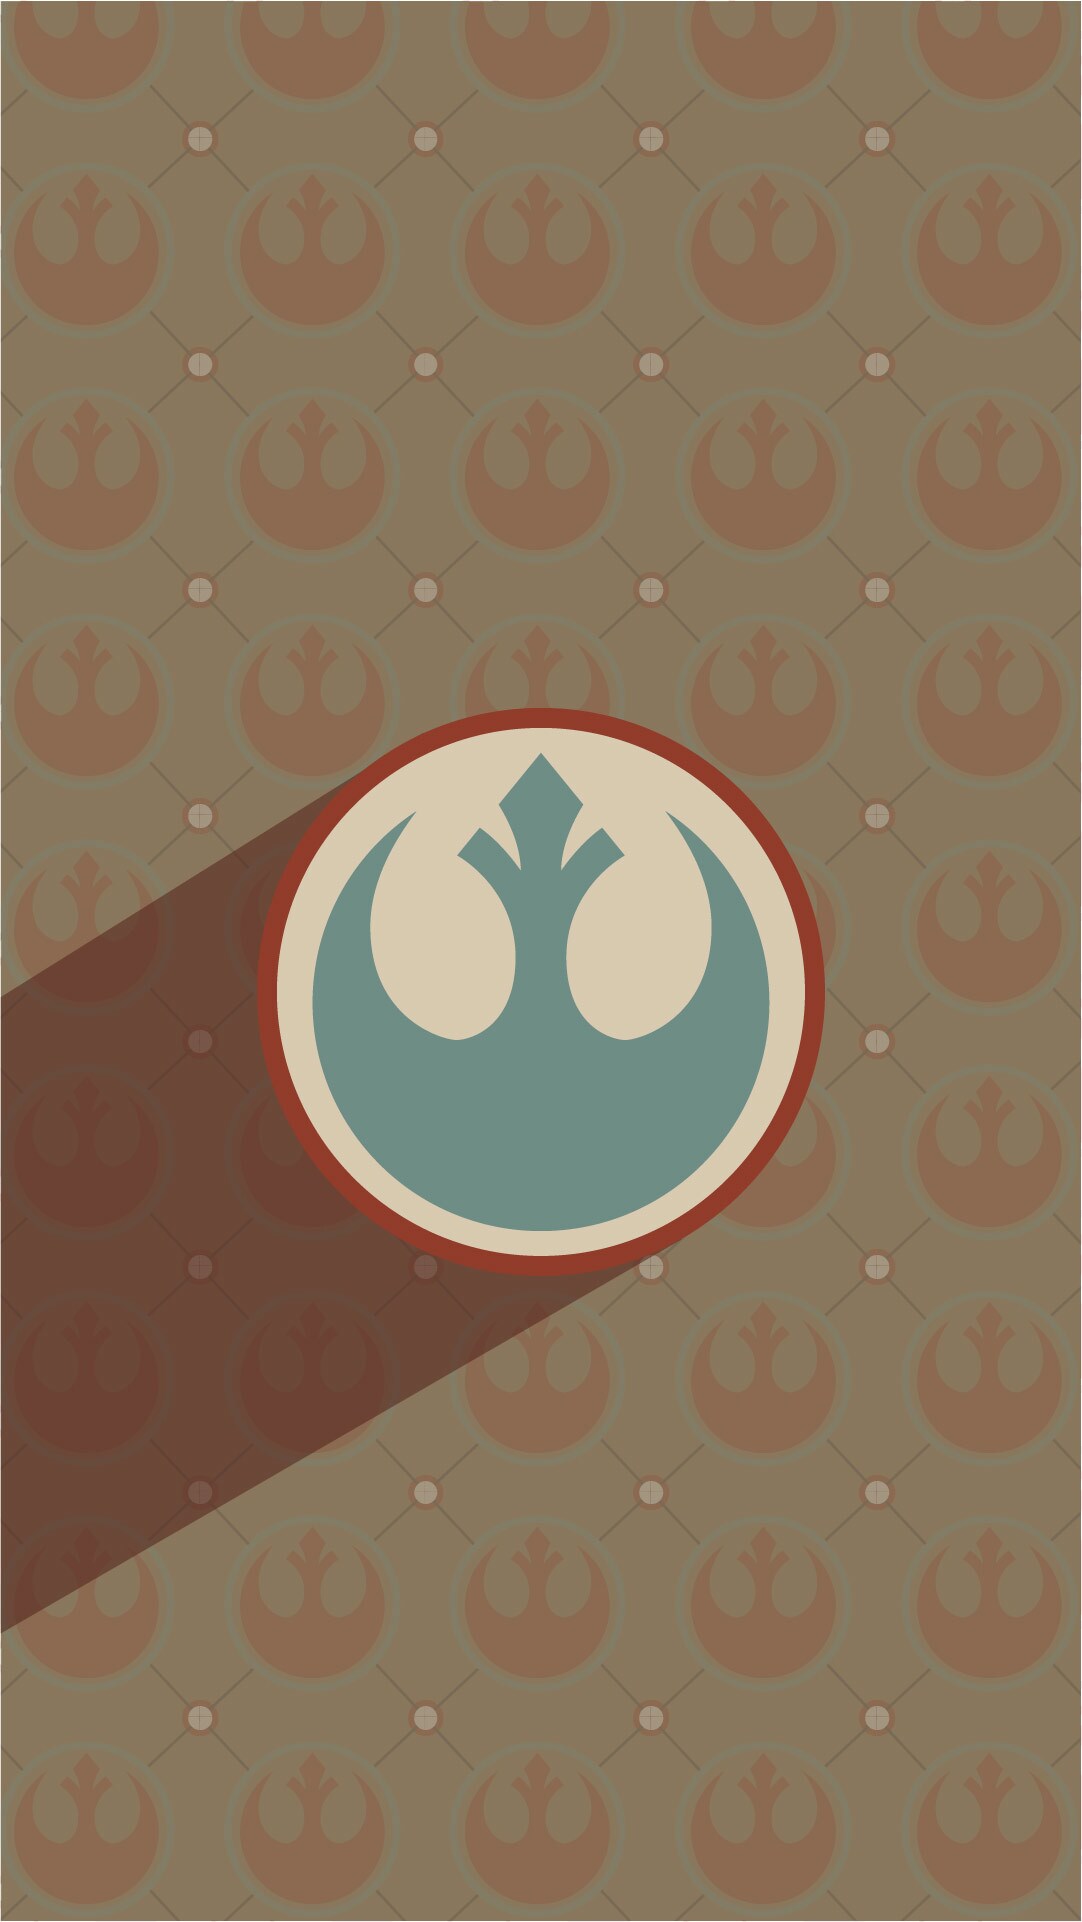 Star Wars Wallpapers for Mobile Devices 